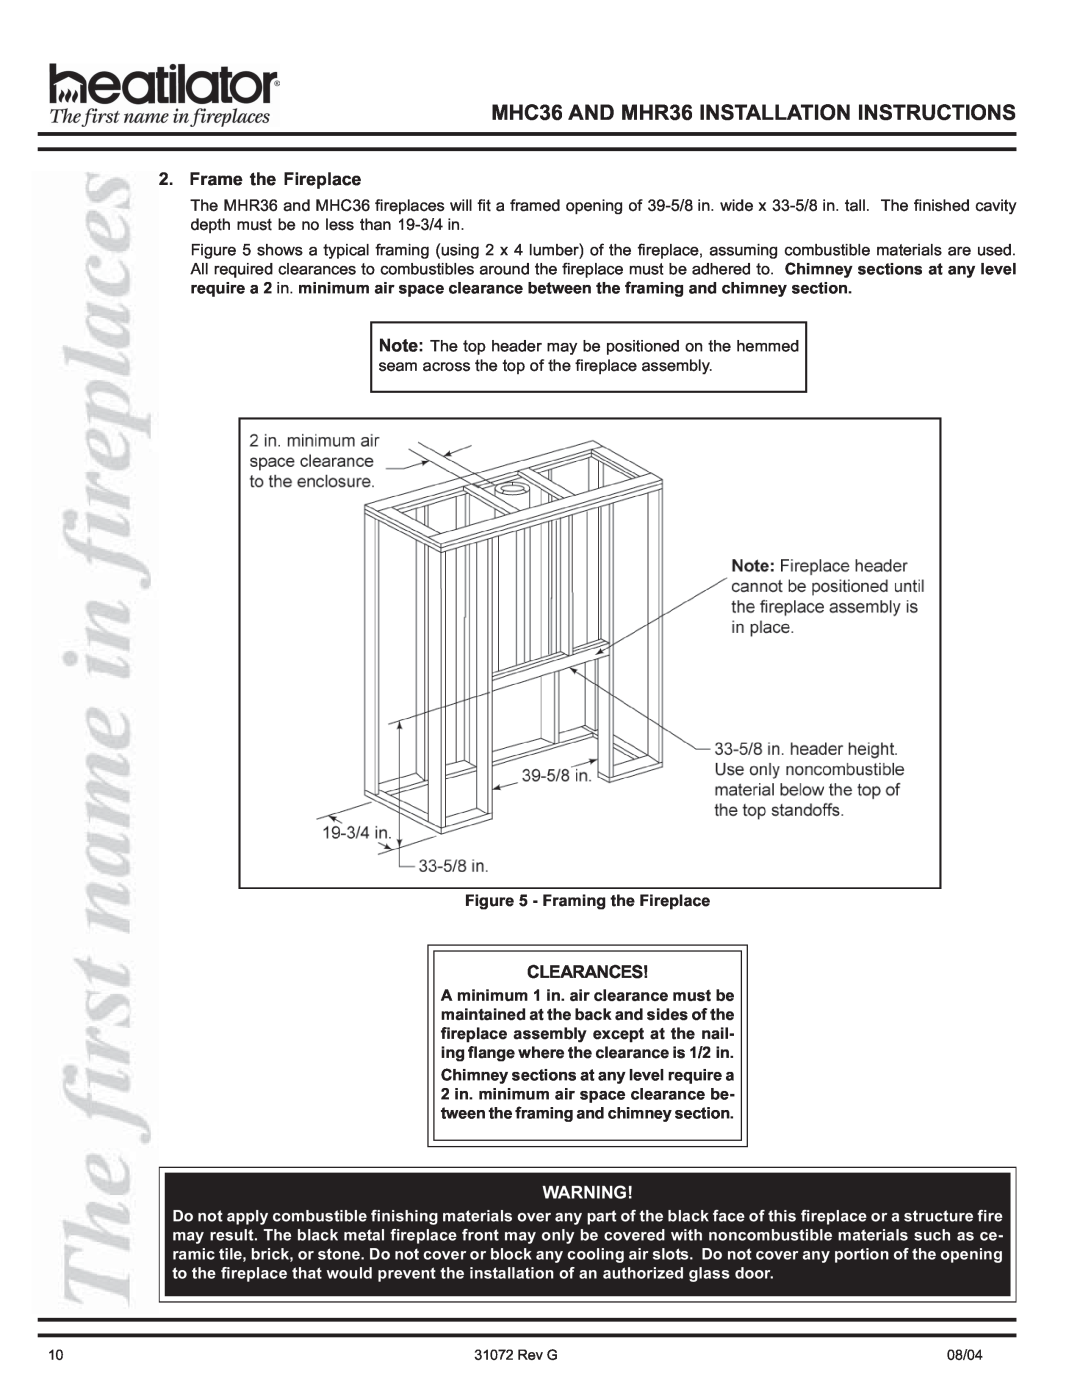 Heart & Home Collectables manual Frame the Fireplace, MHC36 AND MHR36 INSTALLATION INSTRUCTIONS, Clearances 